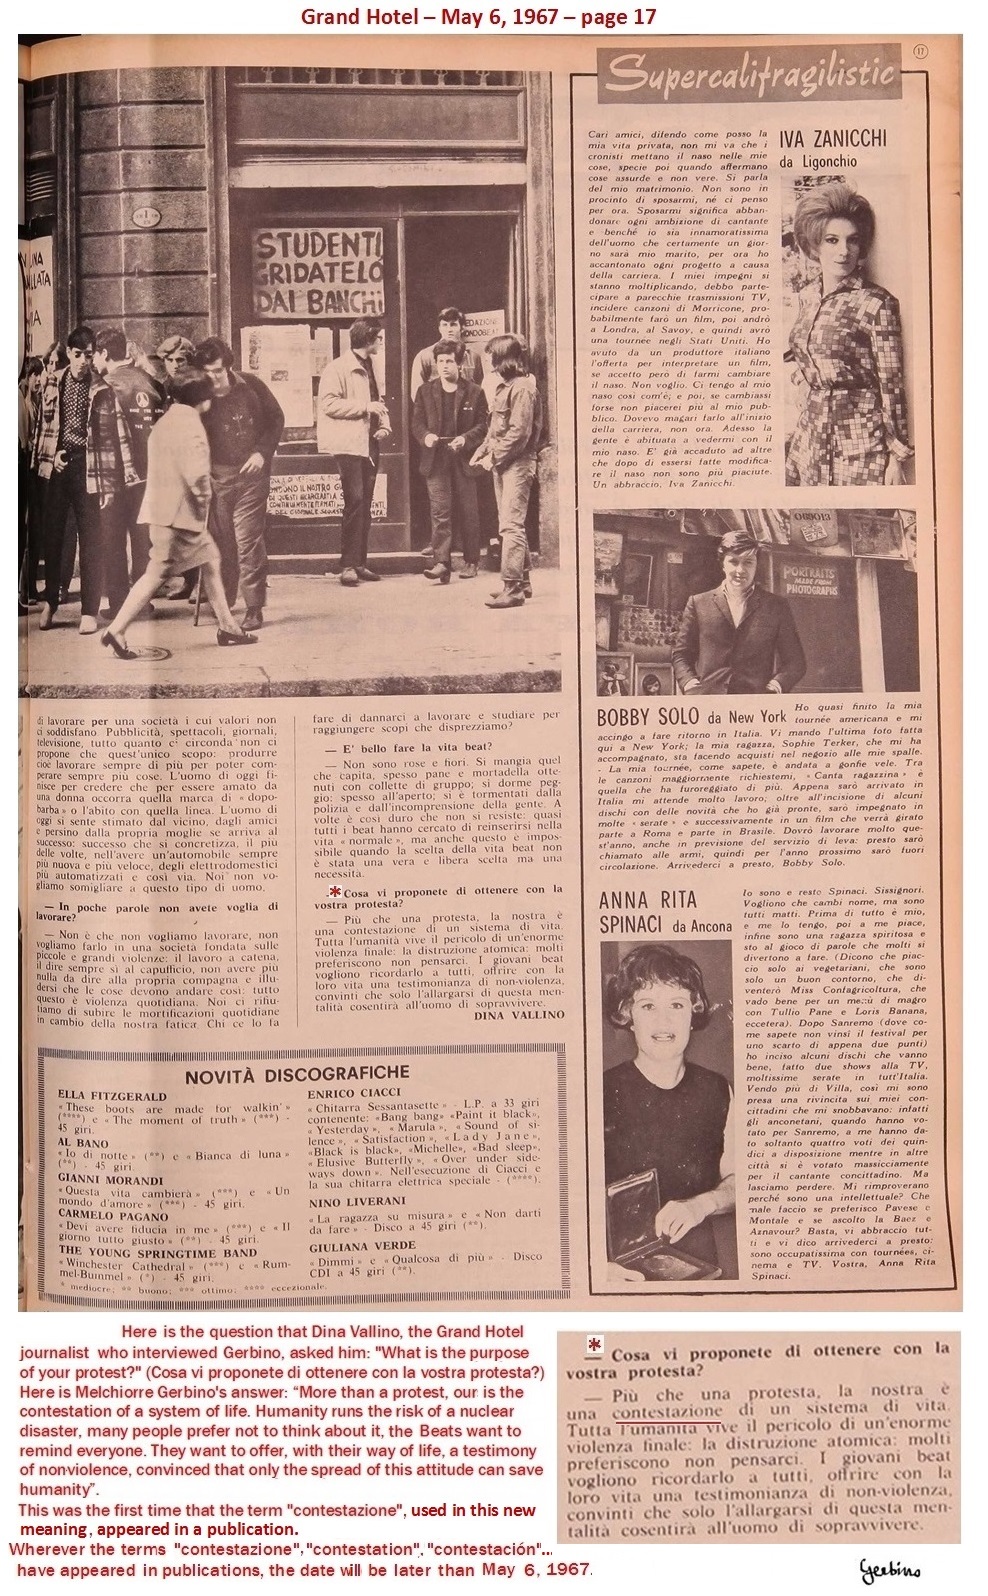 This article appeared on May 6, 1967 (2)